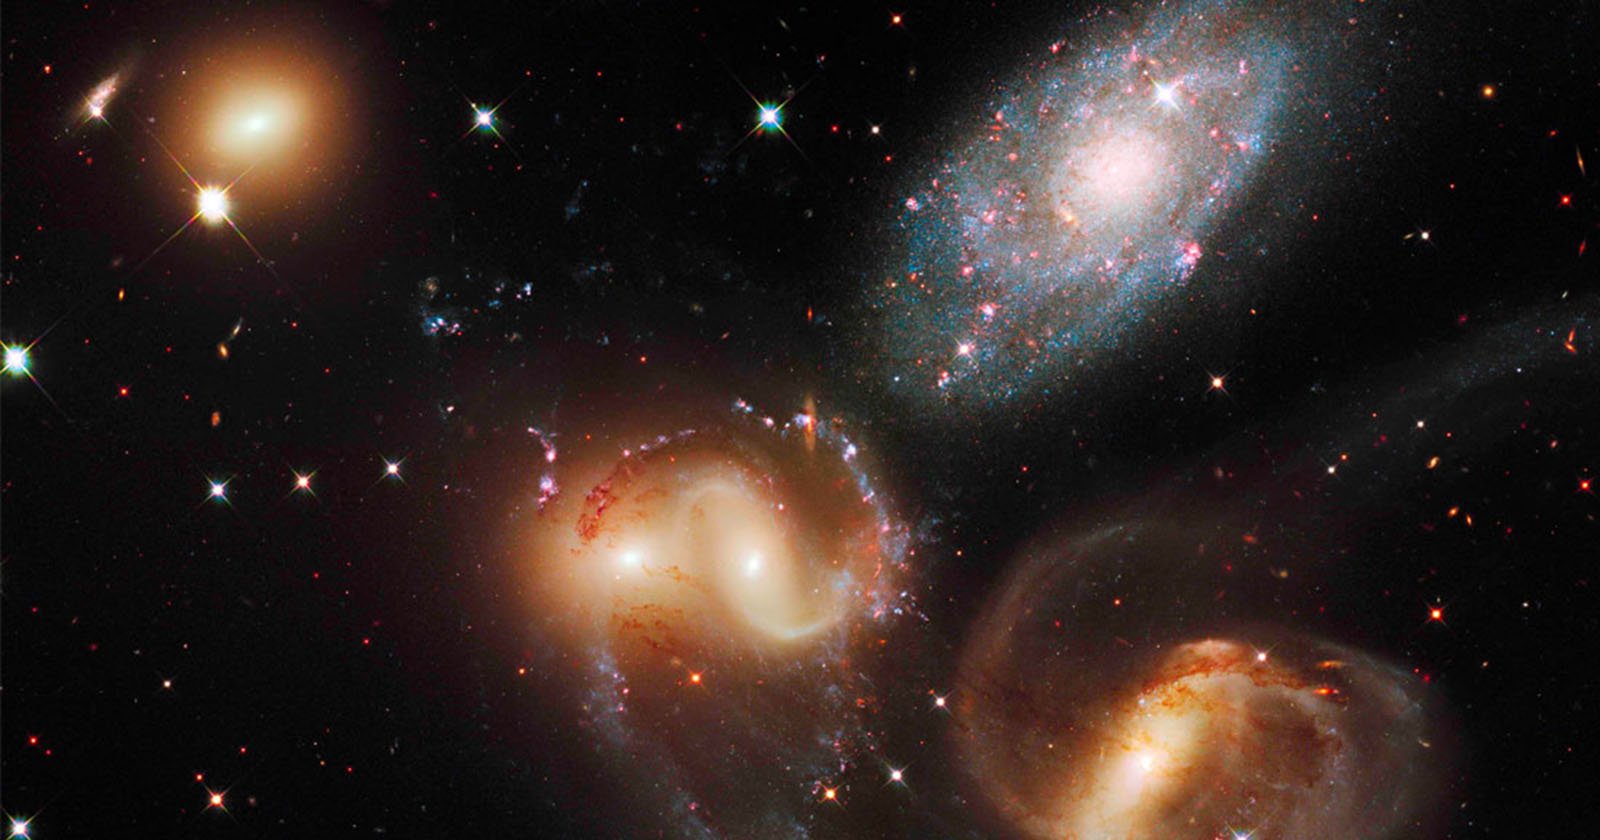 Hubble Space Telescope Absorbing Galaxies